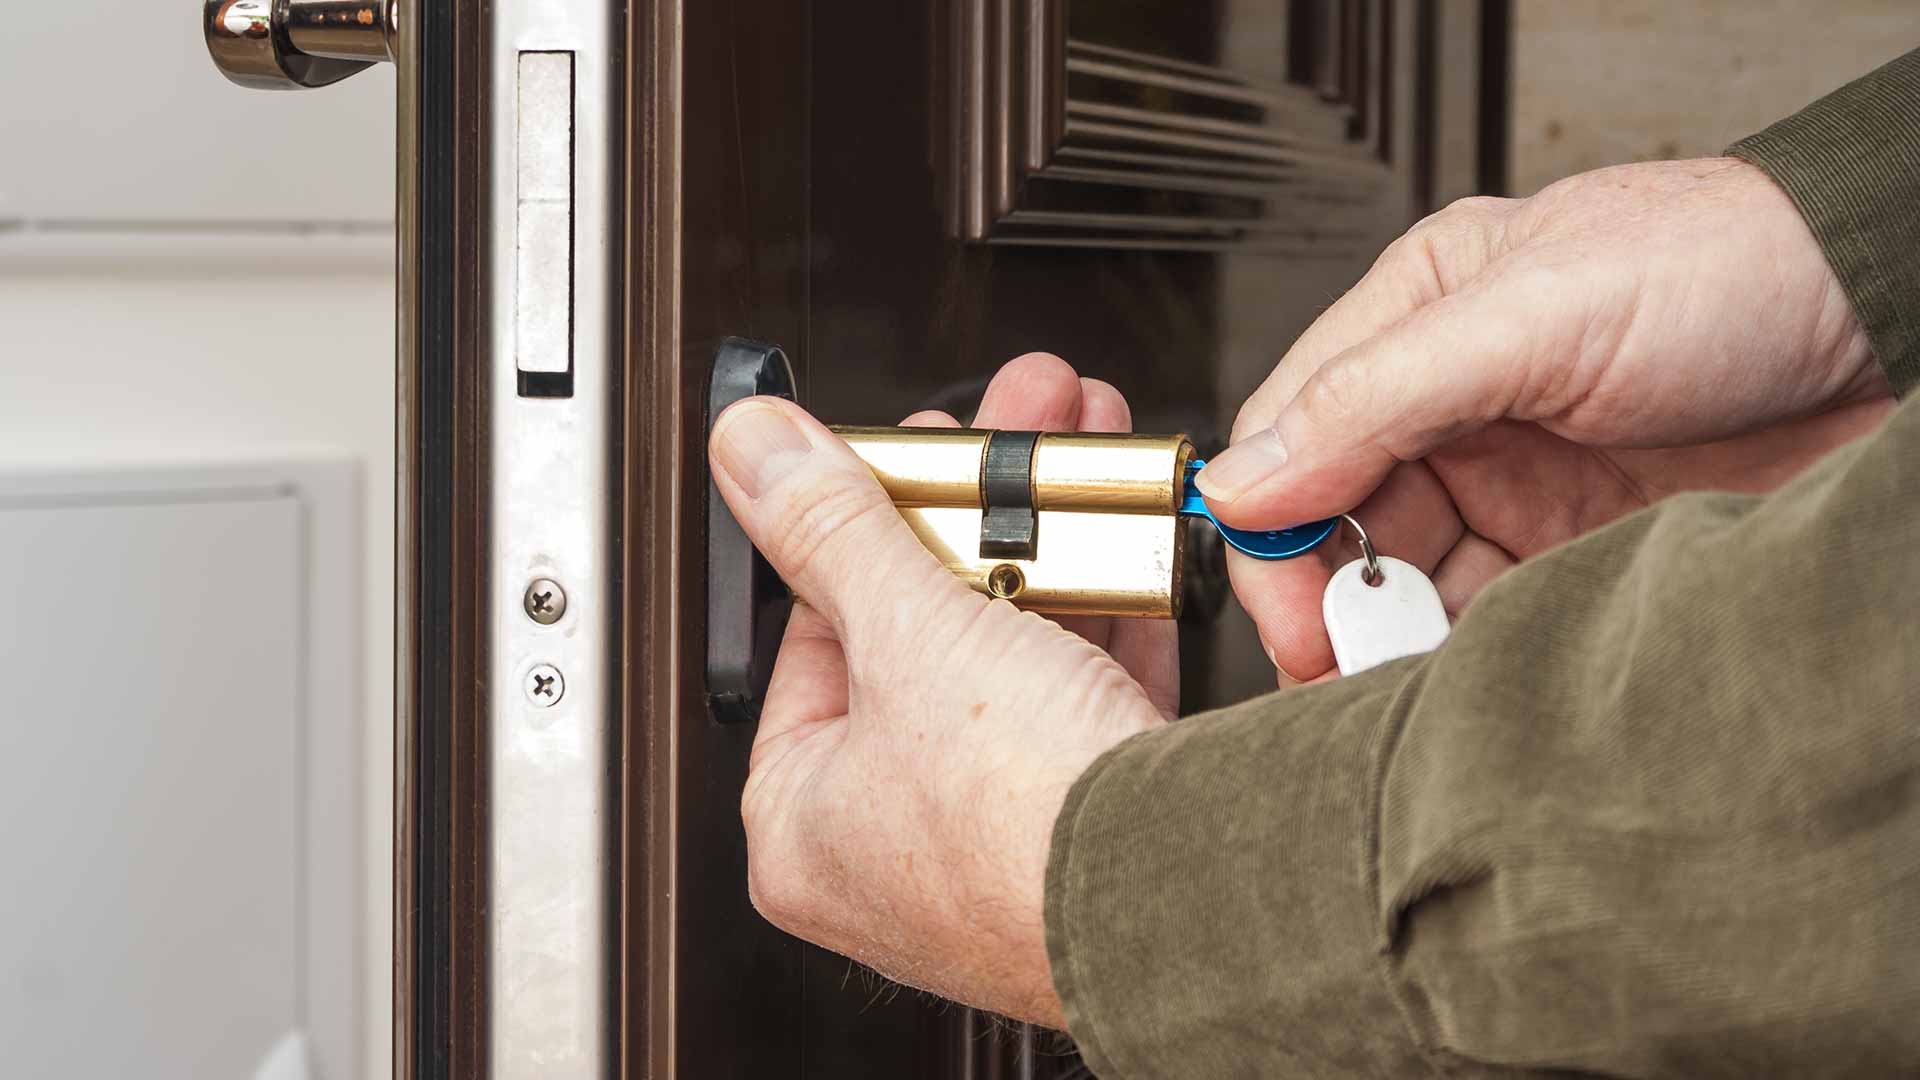 Locksmith re-programmed a smart key and is handing it to a client in Long Island, NY.